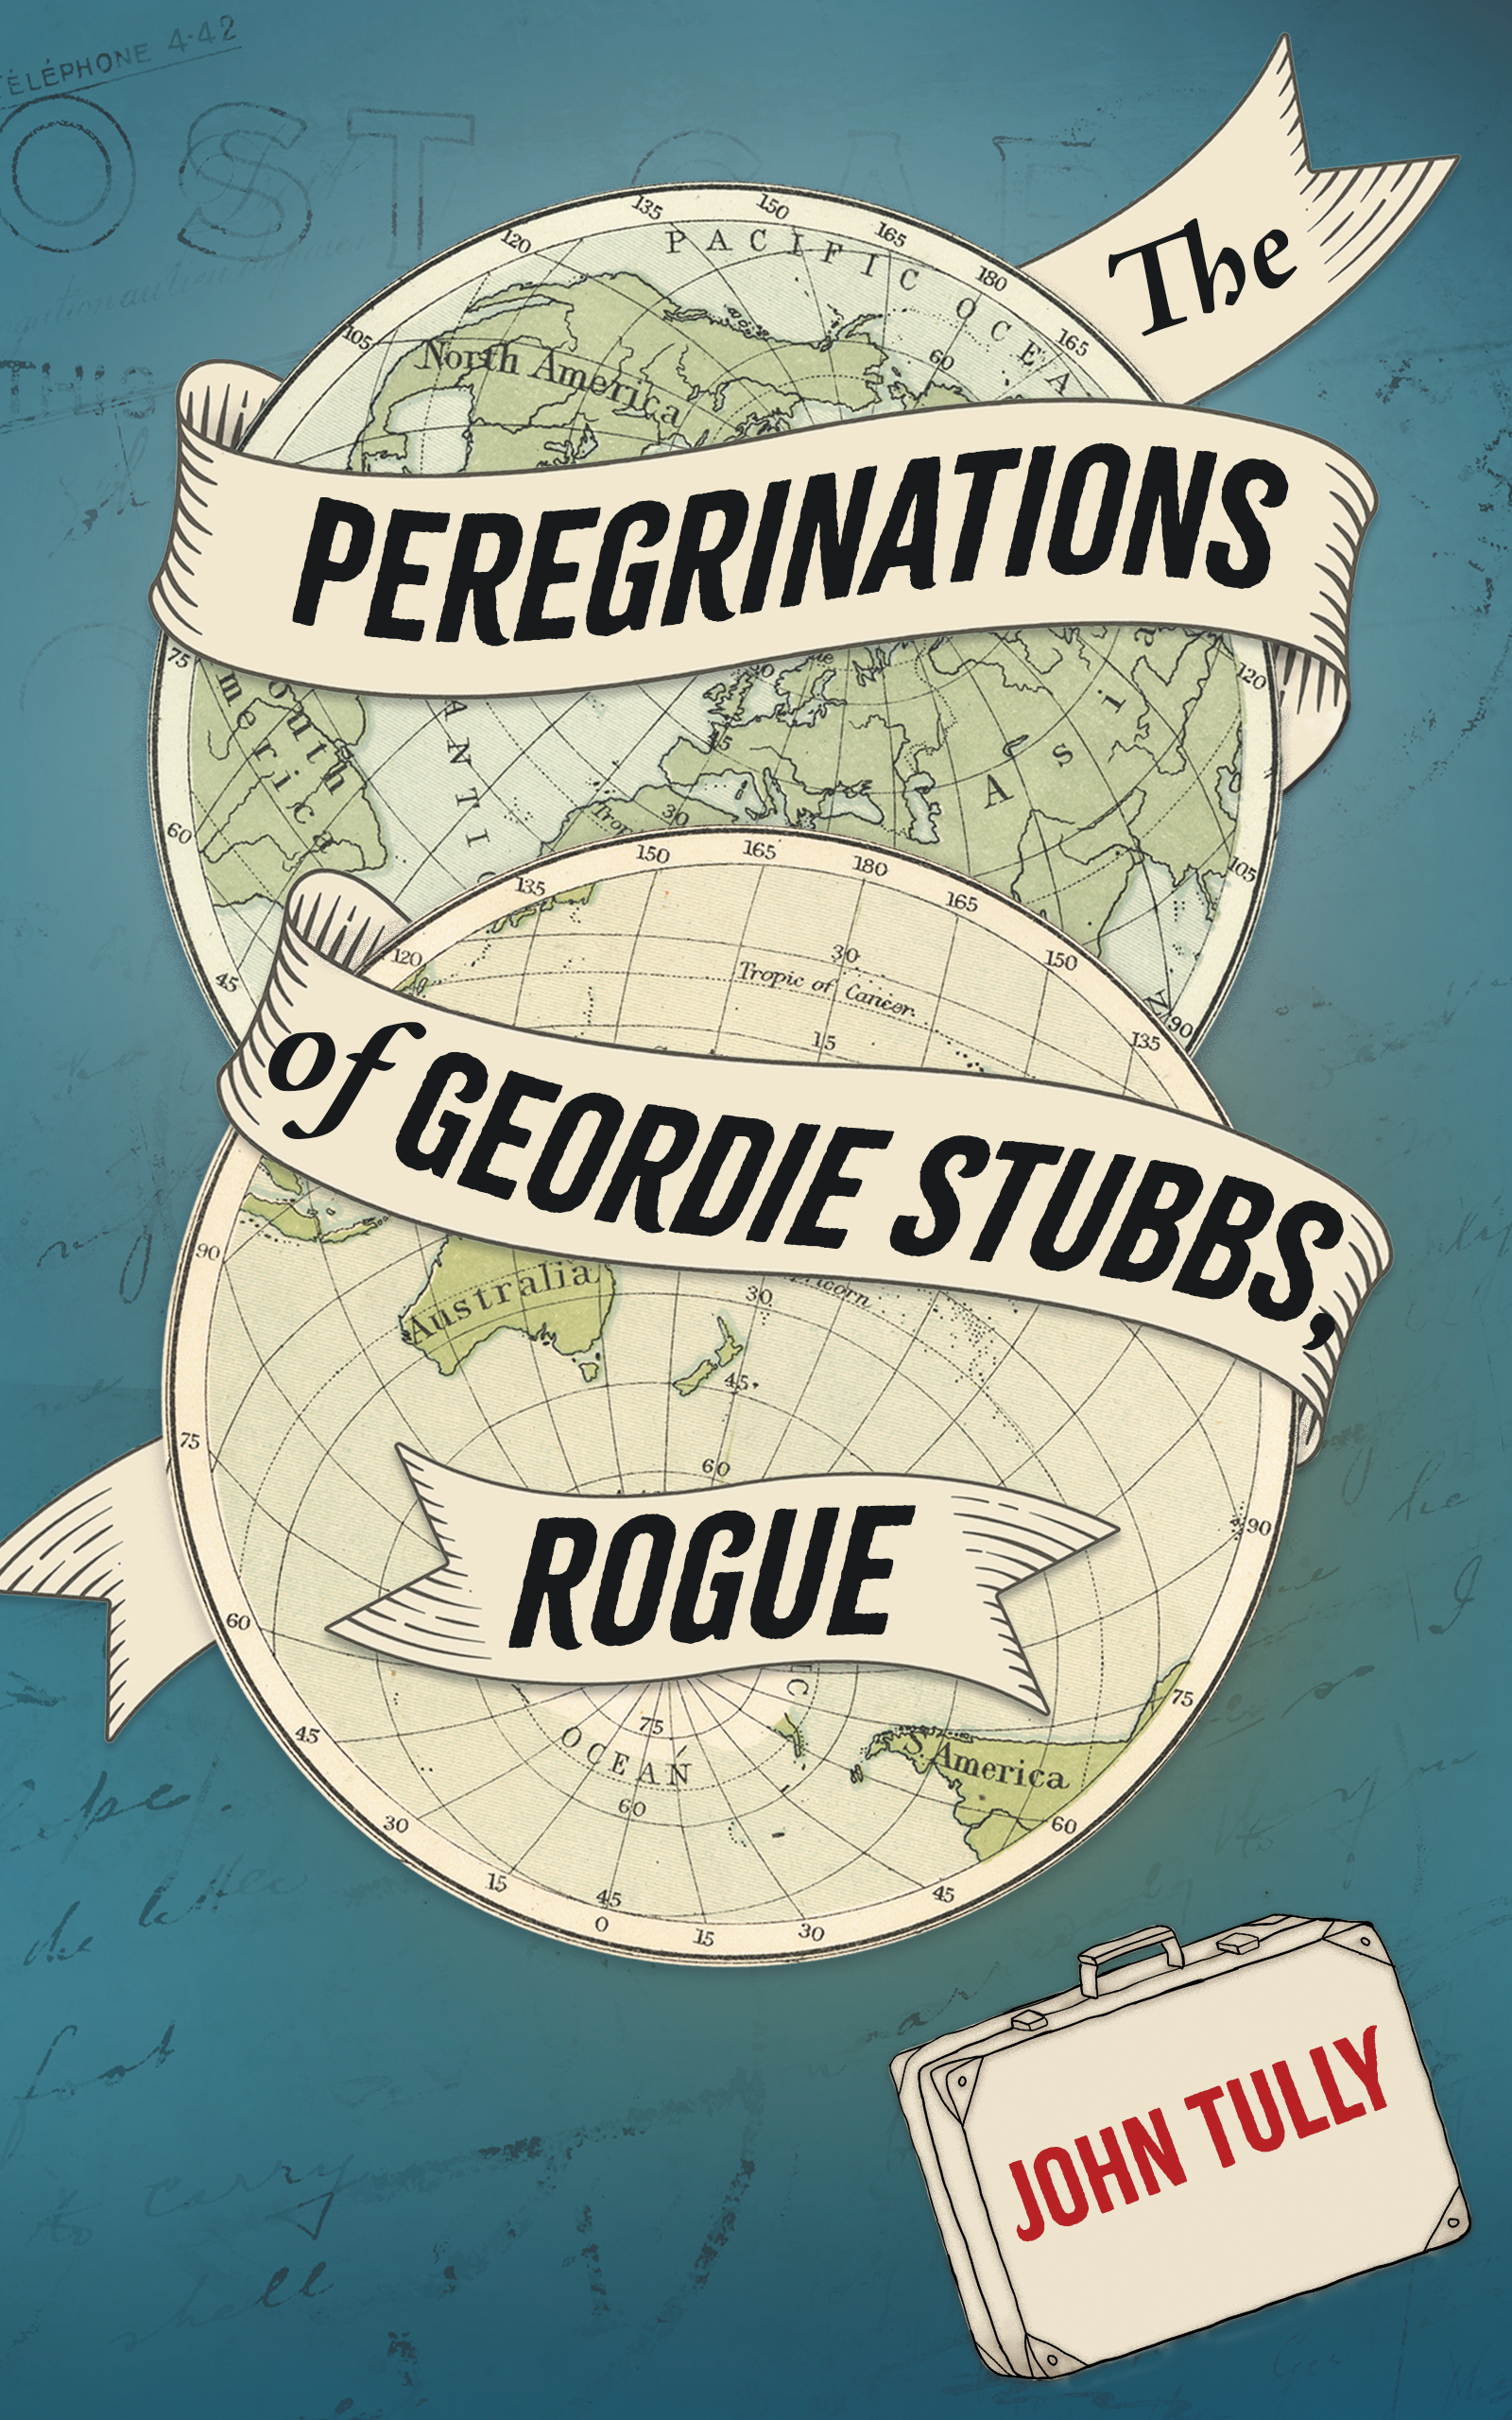 Cover of The Peregrinations of Geordie Stubbs, Rogue. The title is in ribbon banners across two antique hemisphere maps. The author's name, John Tully, is on a suitcase in the bottom right corner